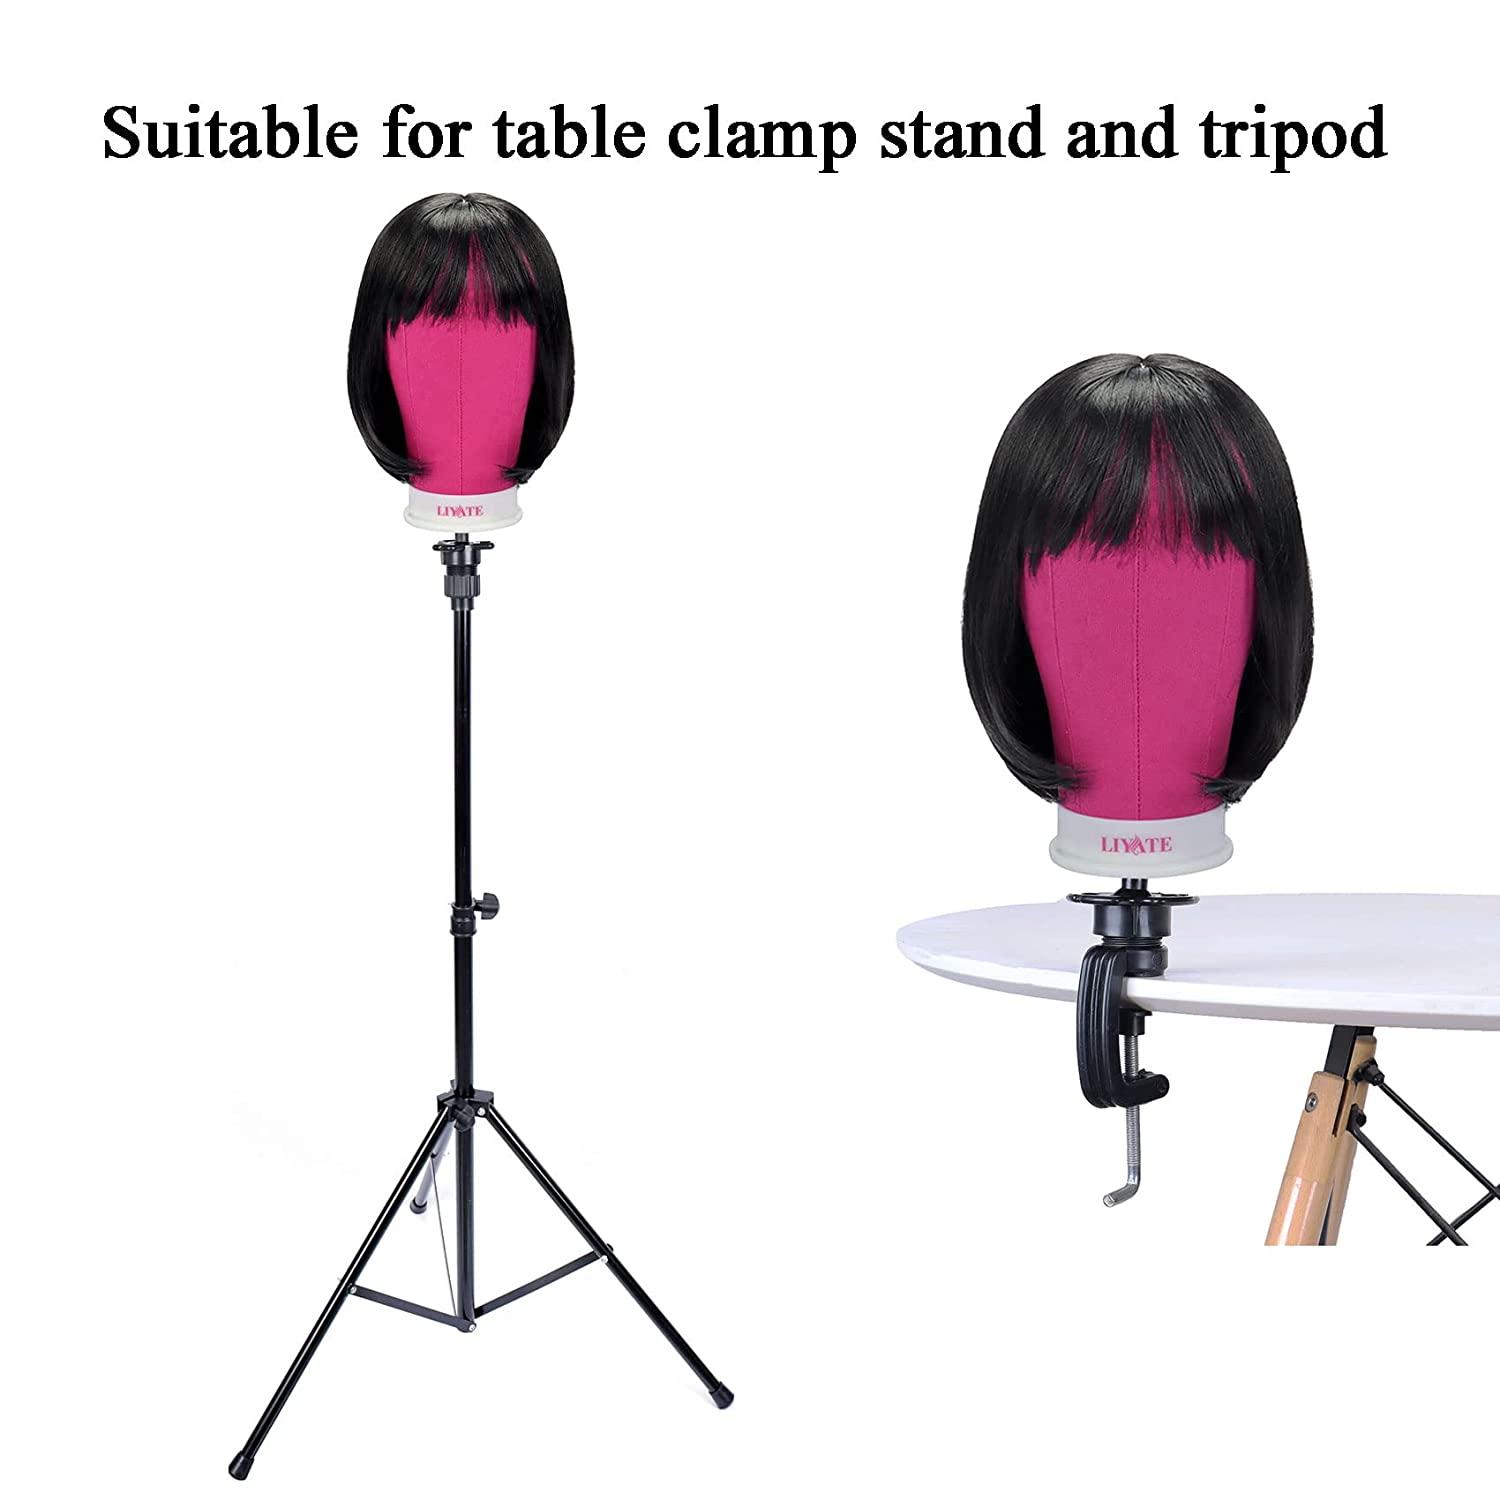 Wig Styling Kit - Canvas Mannequin Wig Head with Table Clamp